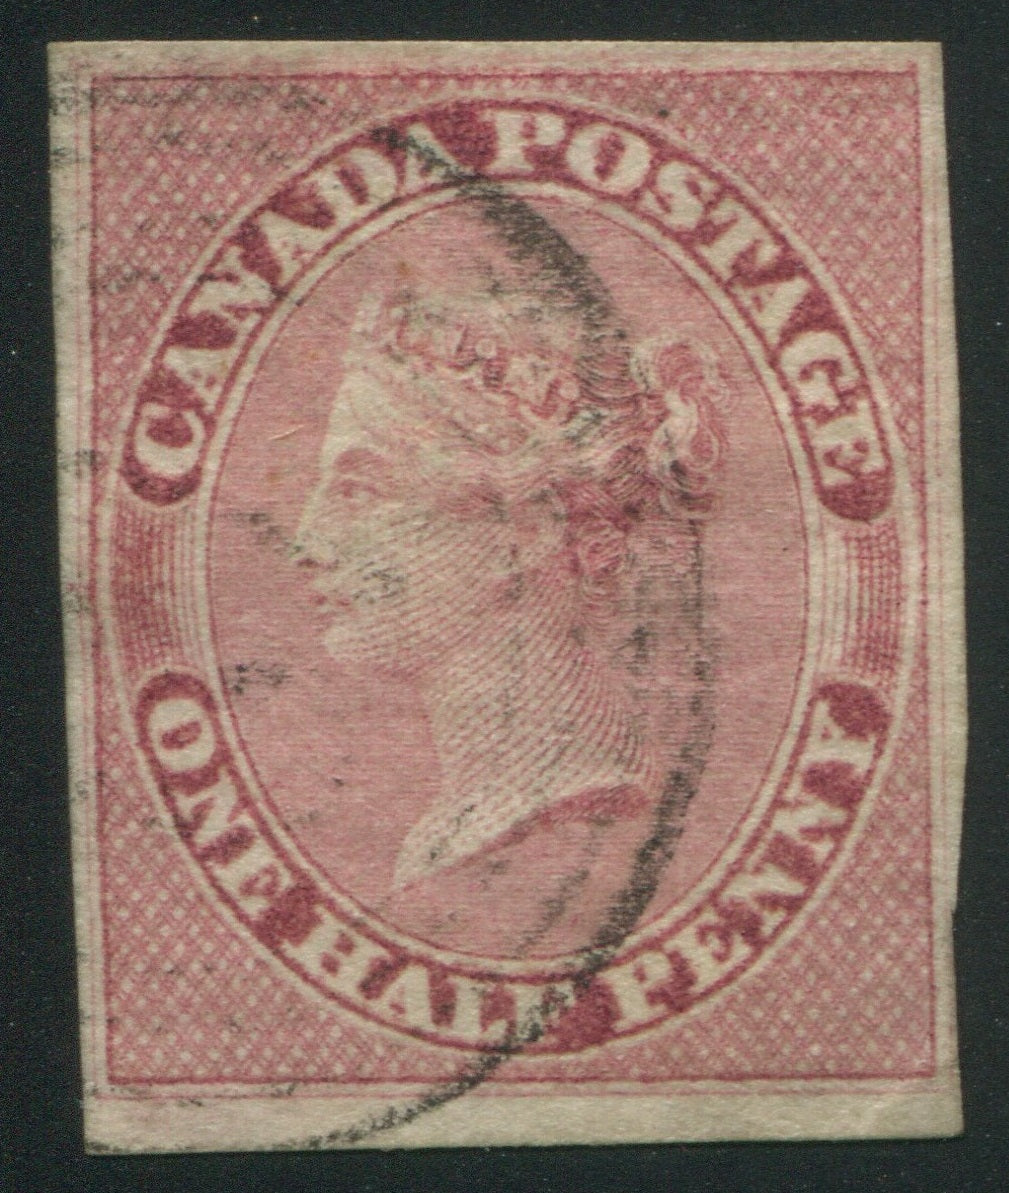 0008CA2206 - Canada #8 - Used Strong Re-Entry